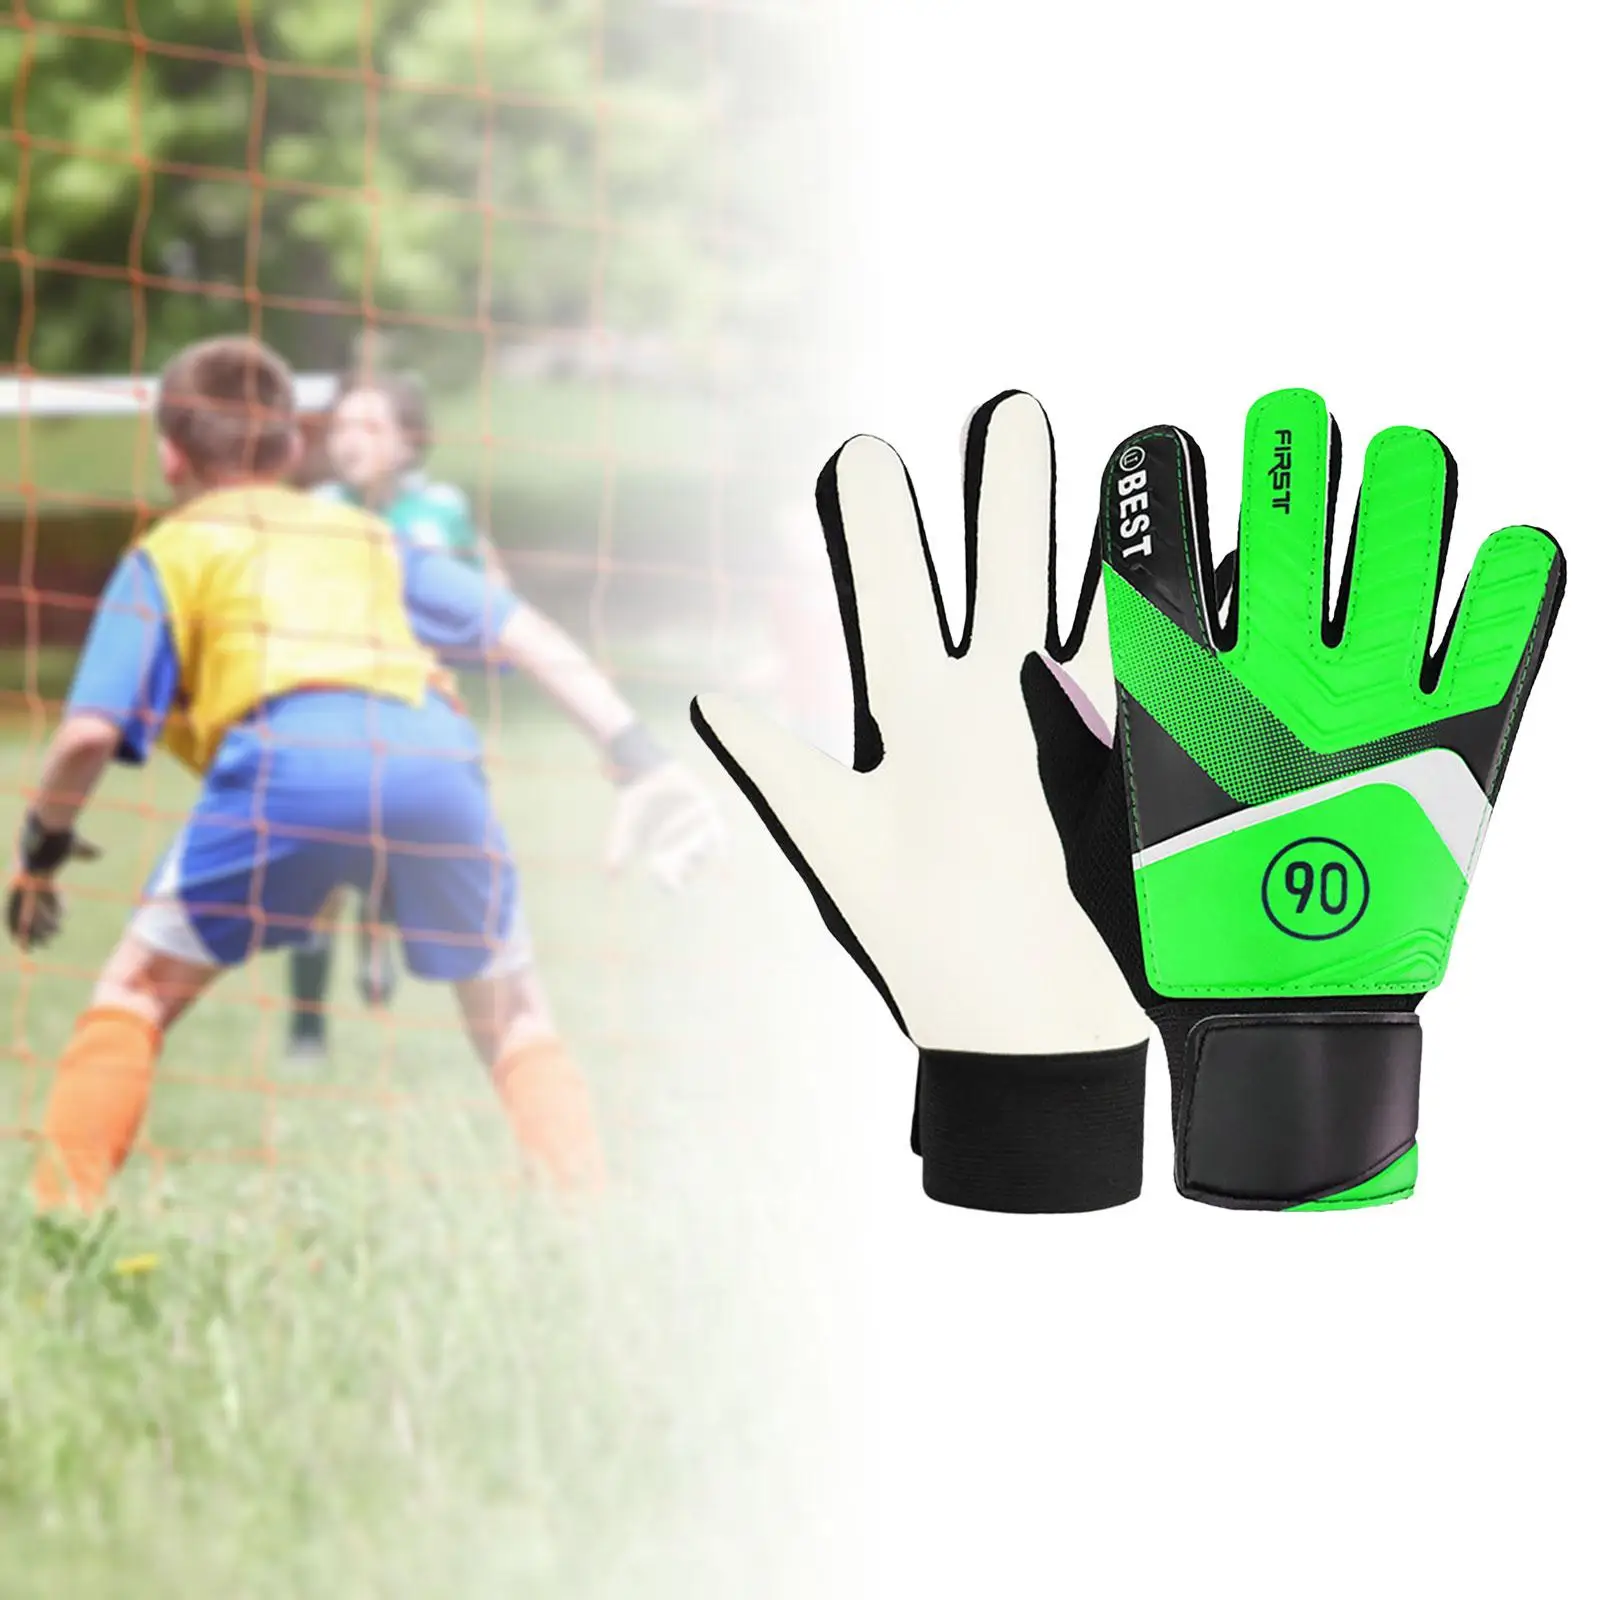 Goalkeeper Gloves Professional Match Breathable High Performance Training Finger Protection Nonslip Strong Grip for Kids